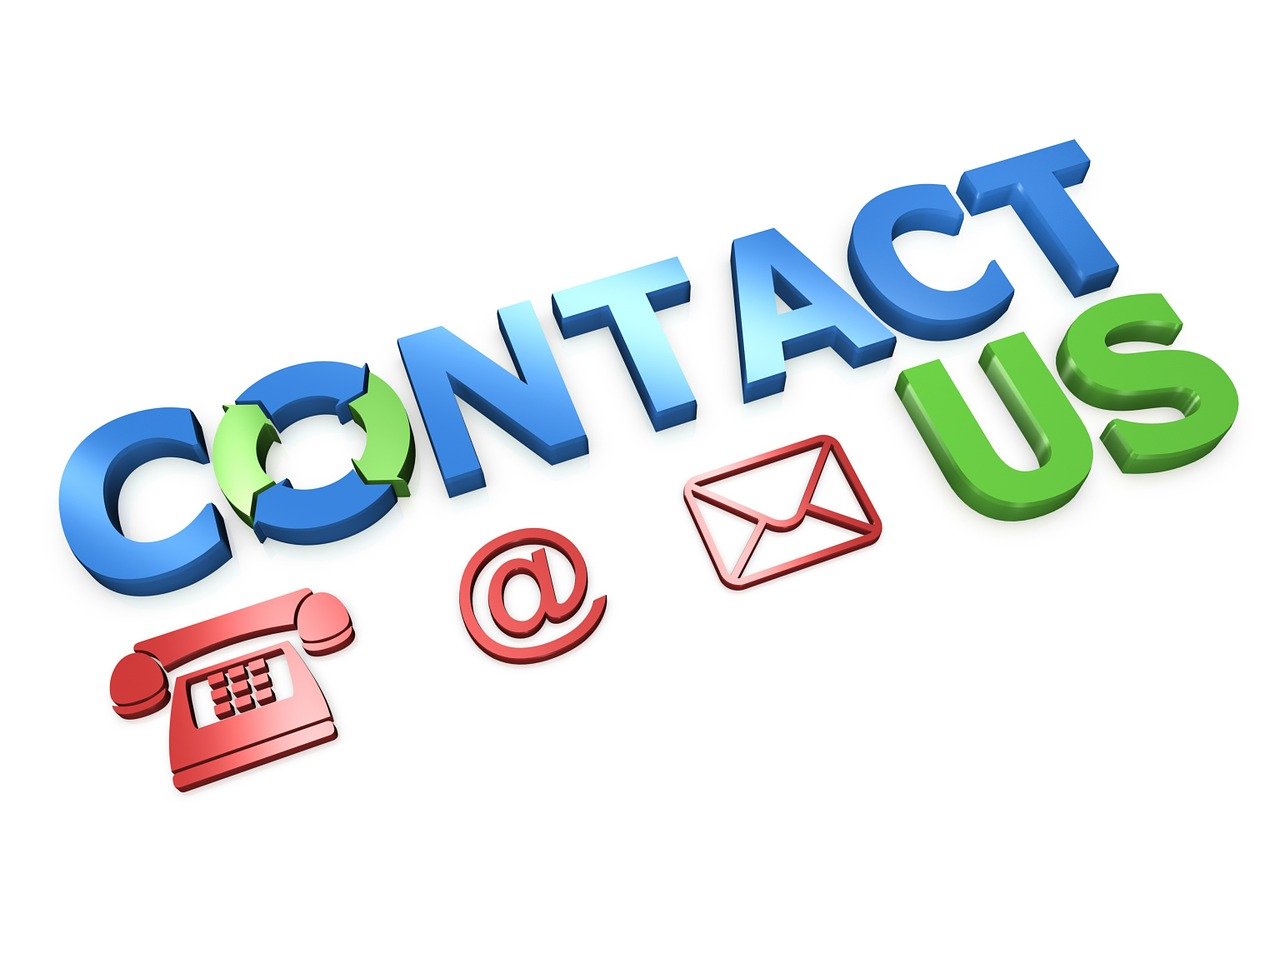 a sign that says contact us on a white background, a picture, by Jon Coffelt, shutterstock, pristine and clean design, no gradients, ships, dlsr photo